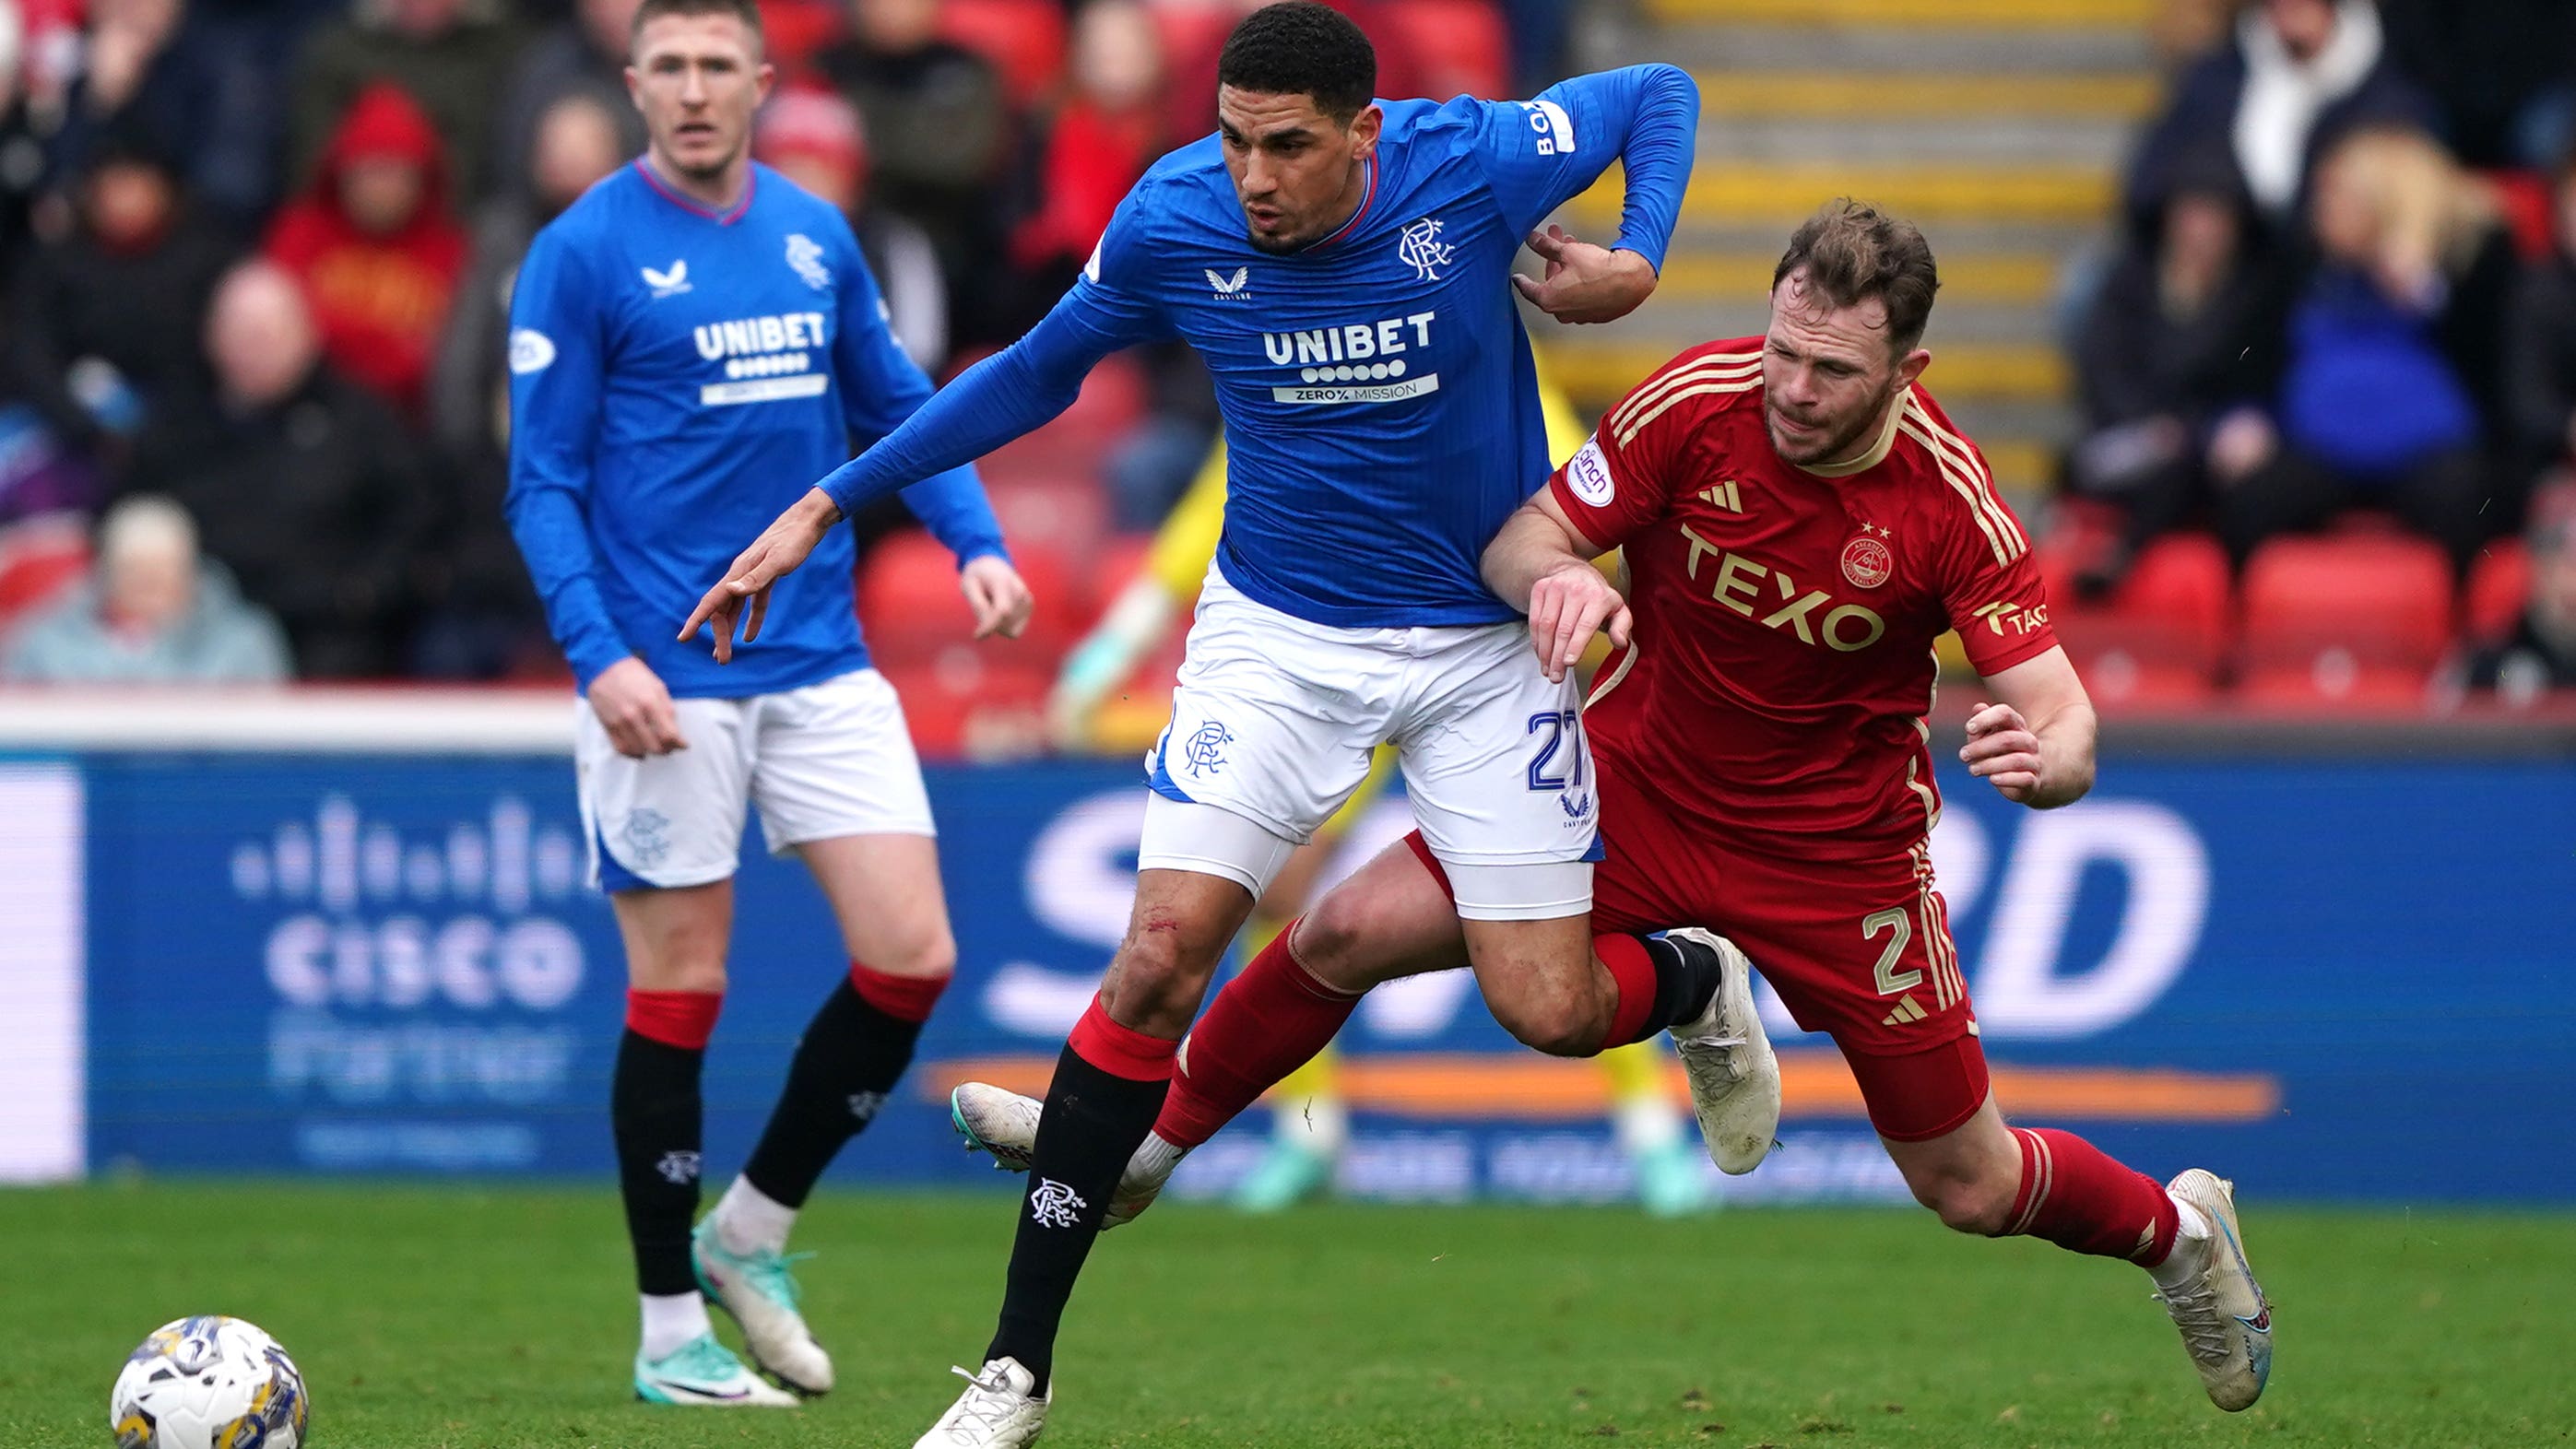 Leon Balogun ‘grateful’ to have earned trust of Rangers boss Philippe Clement